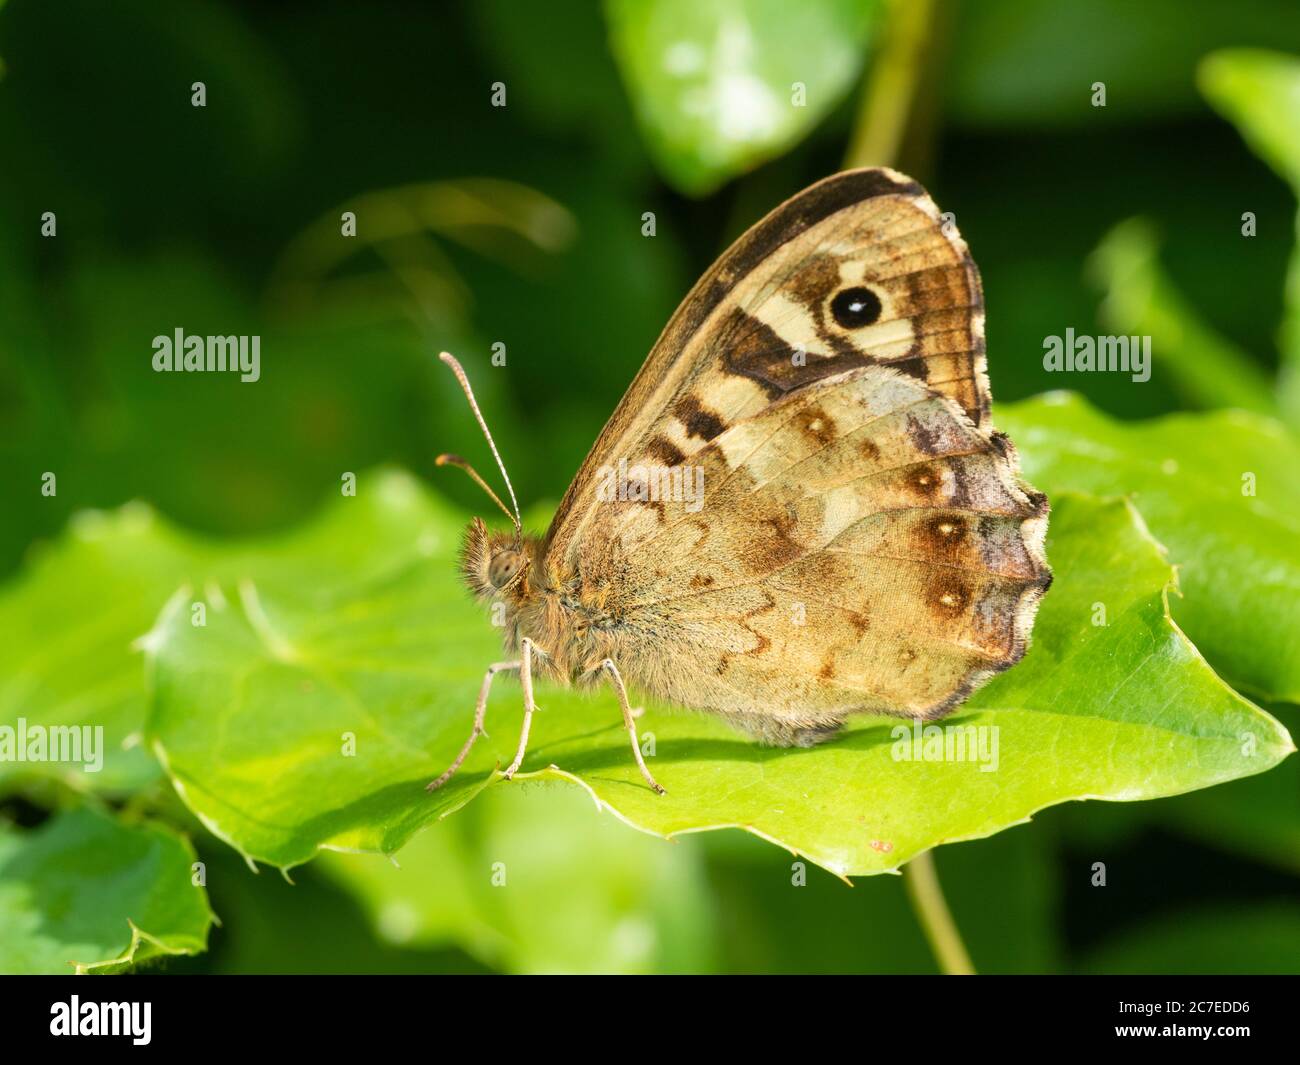 Uk native Speckled Wood butterfly, Pararge aegeria, in resting pose showing the underwing Stock Photo